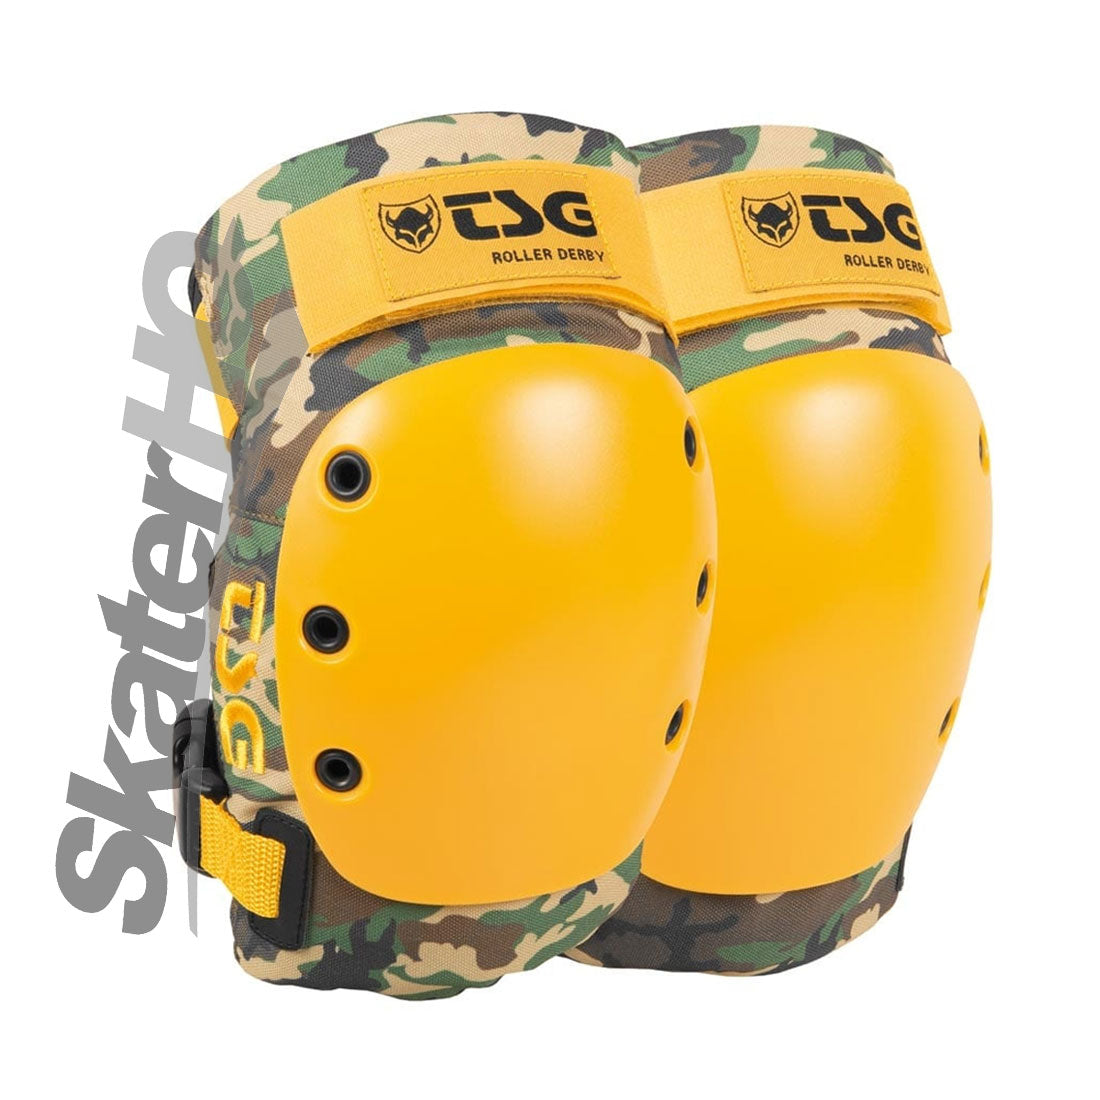 TSG Rollerderby Knee 2.0 Camo - XLarge Protective Gear